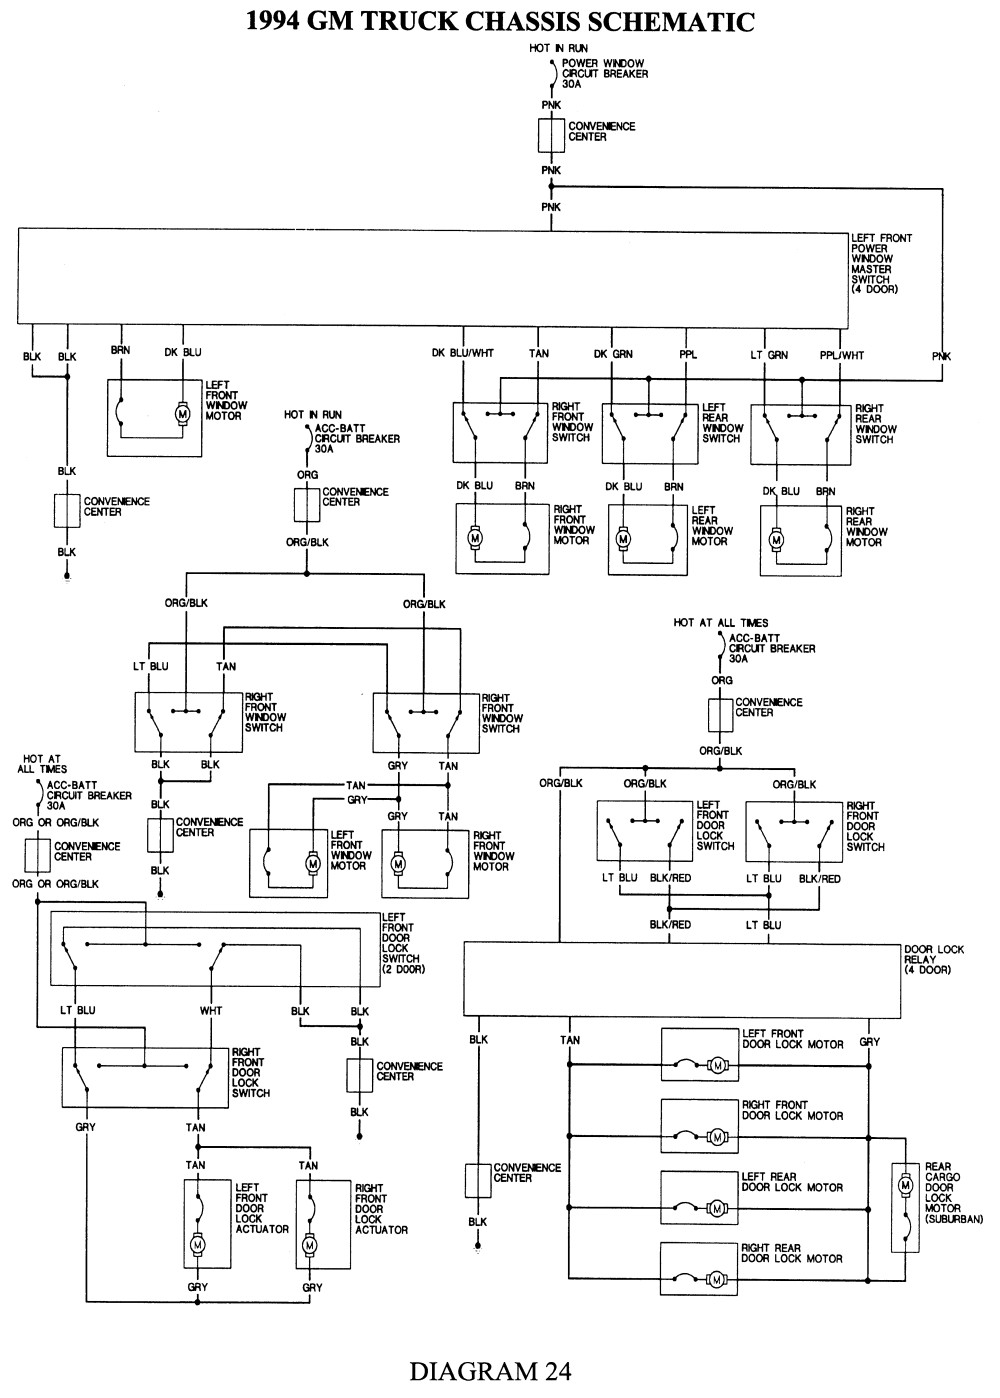 Fig Fig 25 1994 GM Truck Chassis Schematic